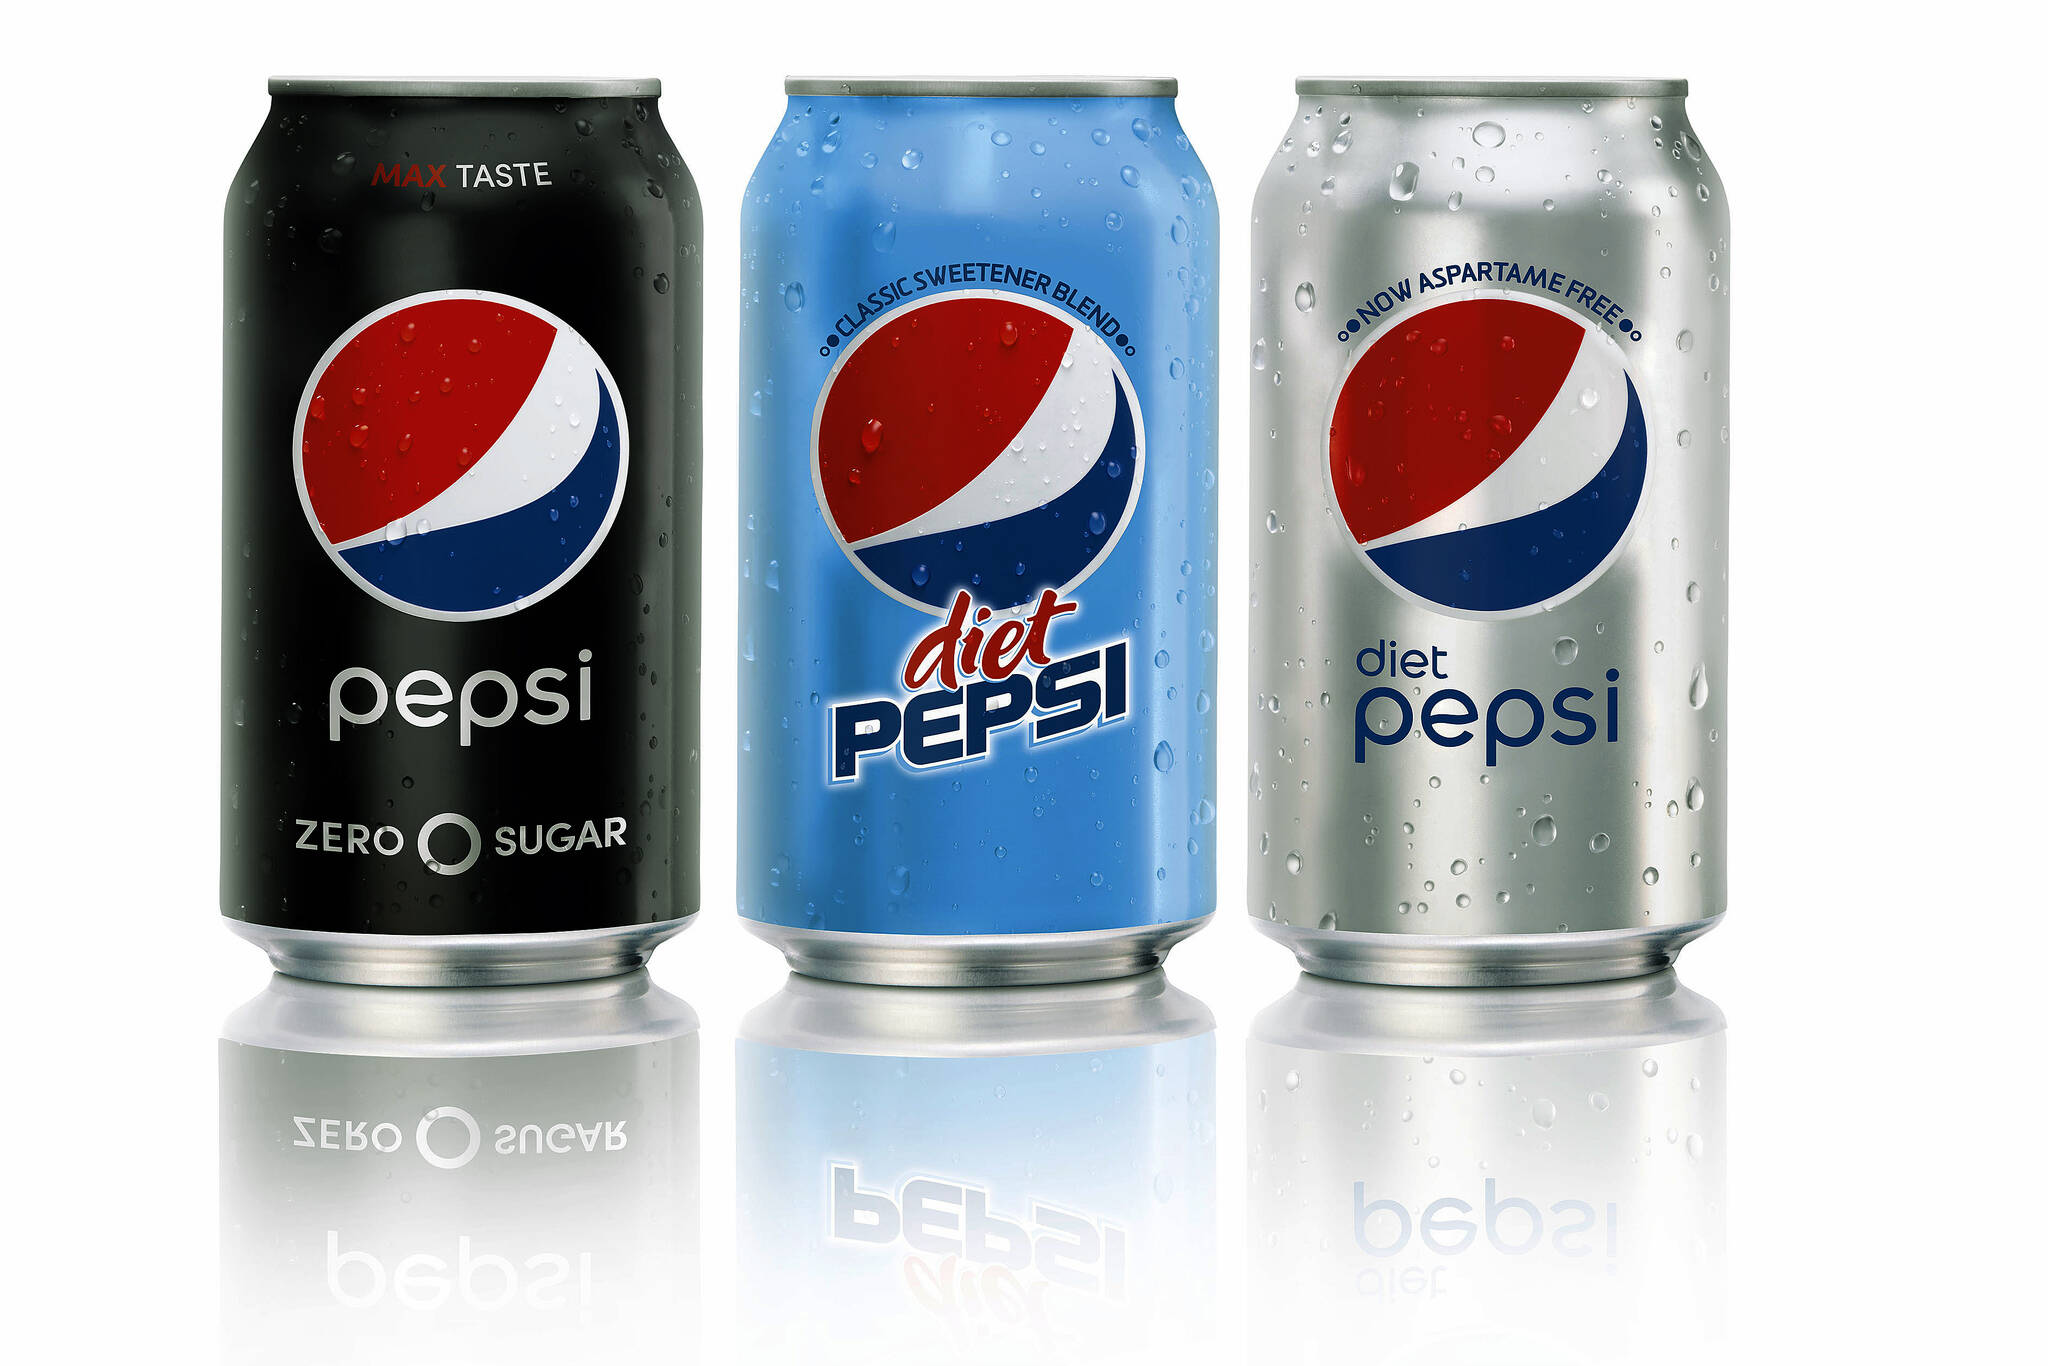 Aspartame was classified as a possible carcinogen to humans, according to the assessments released July 14. (PepsiCo via AP) MANDATORY CREDIT